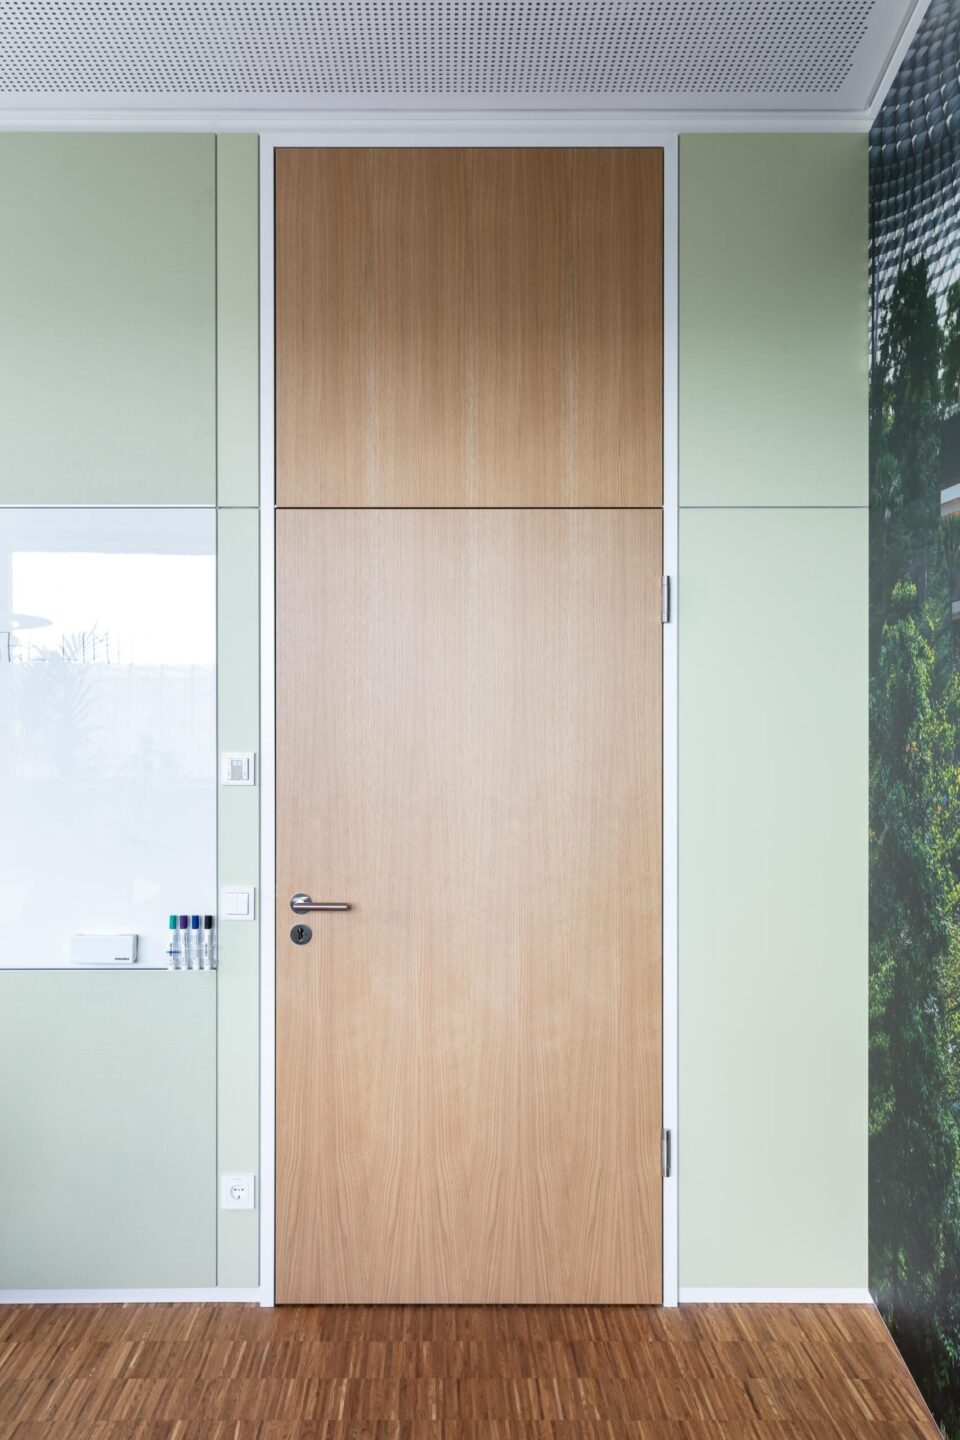 Disy information systems │ fecotür wood │ corridor glass walls from feco